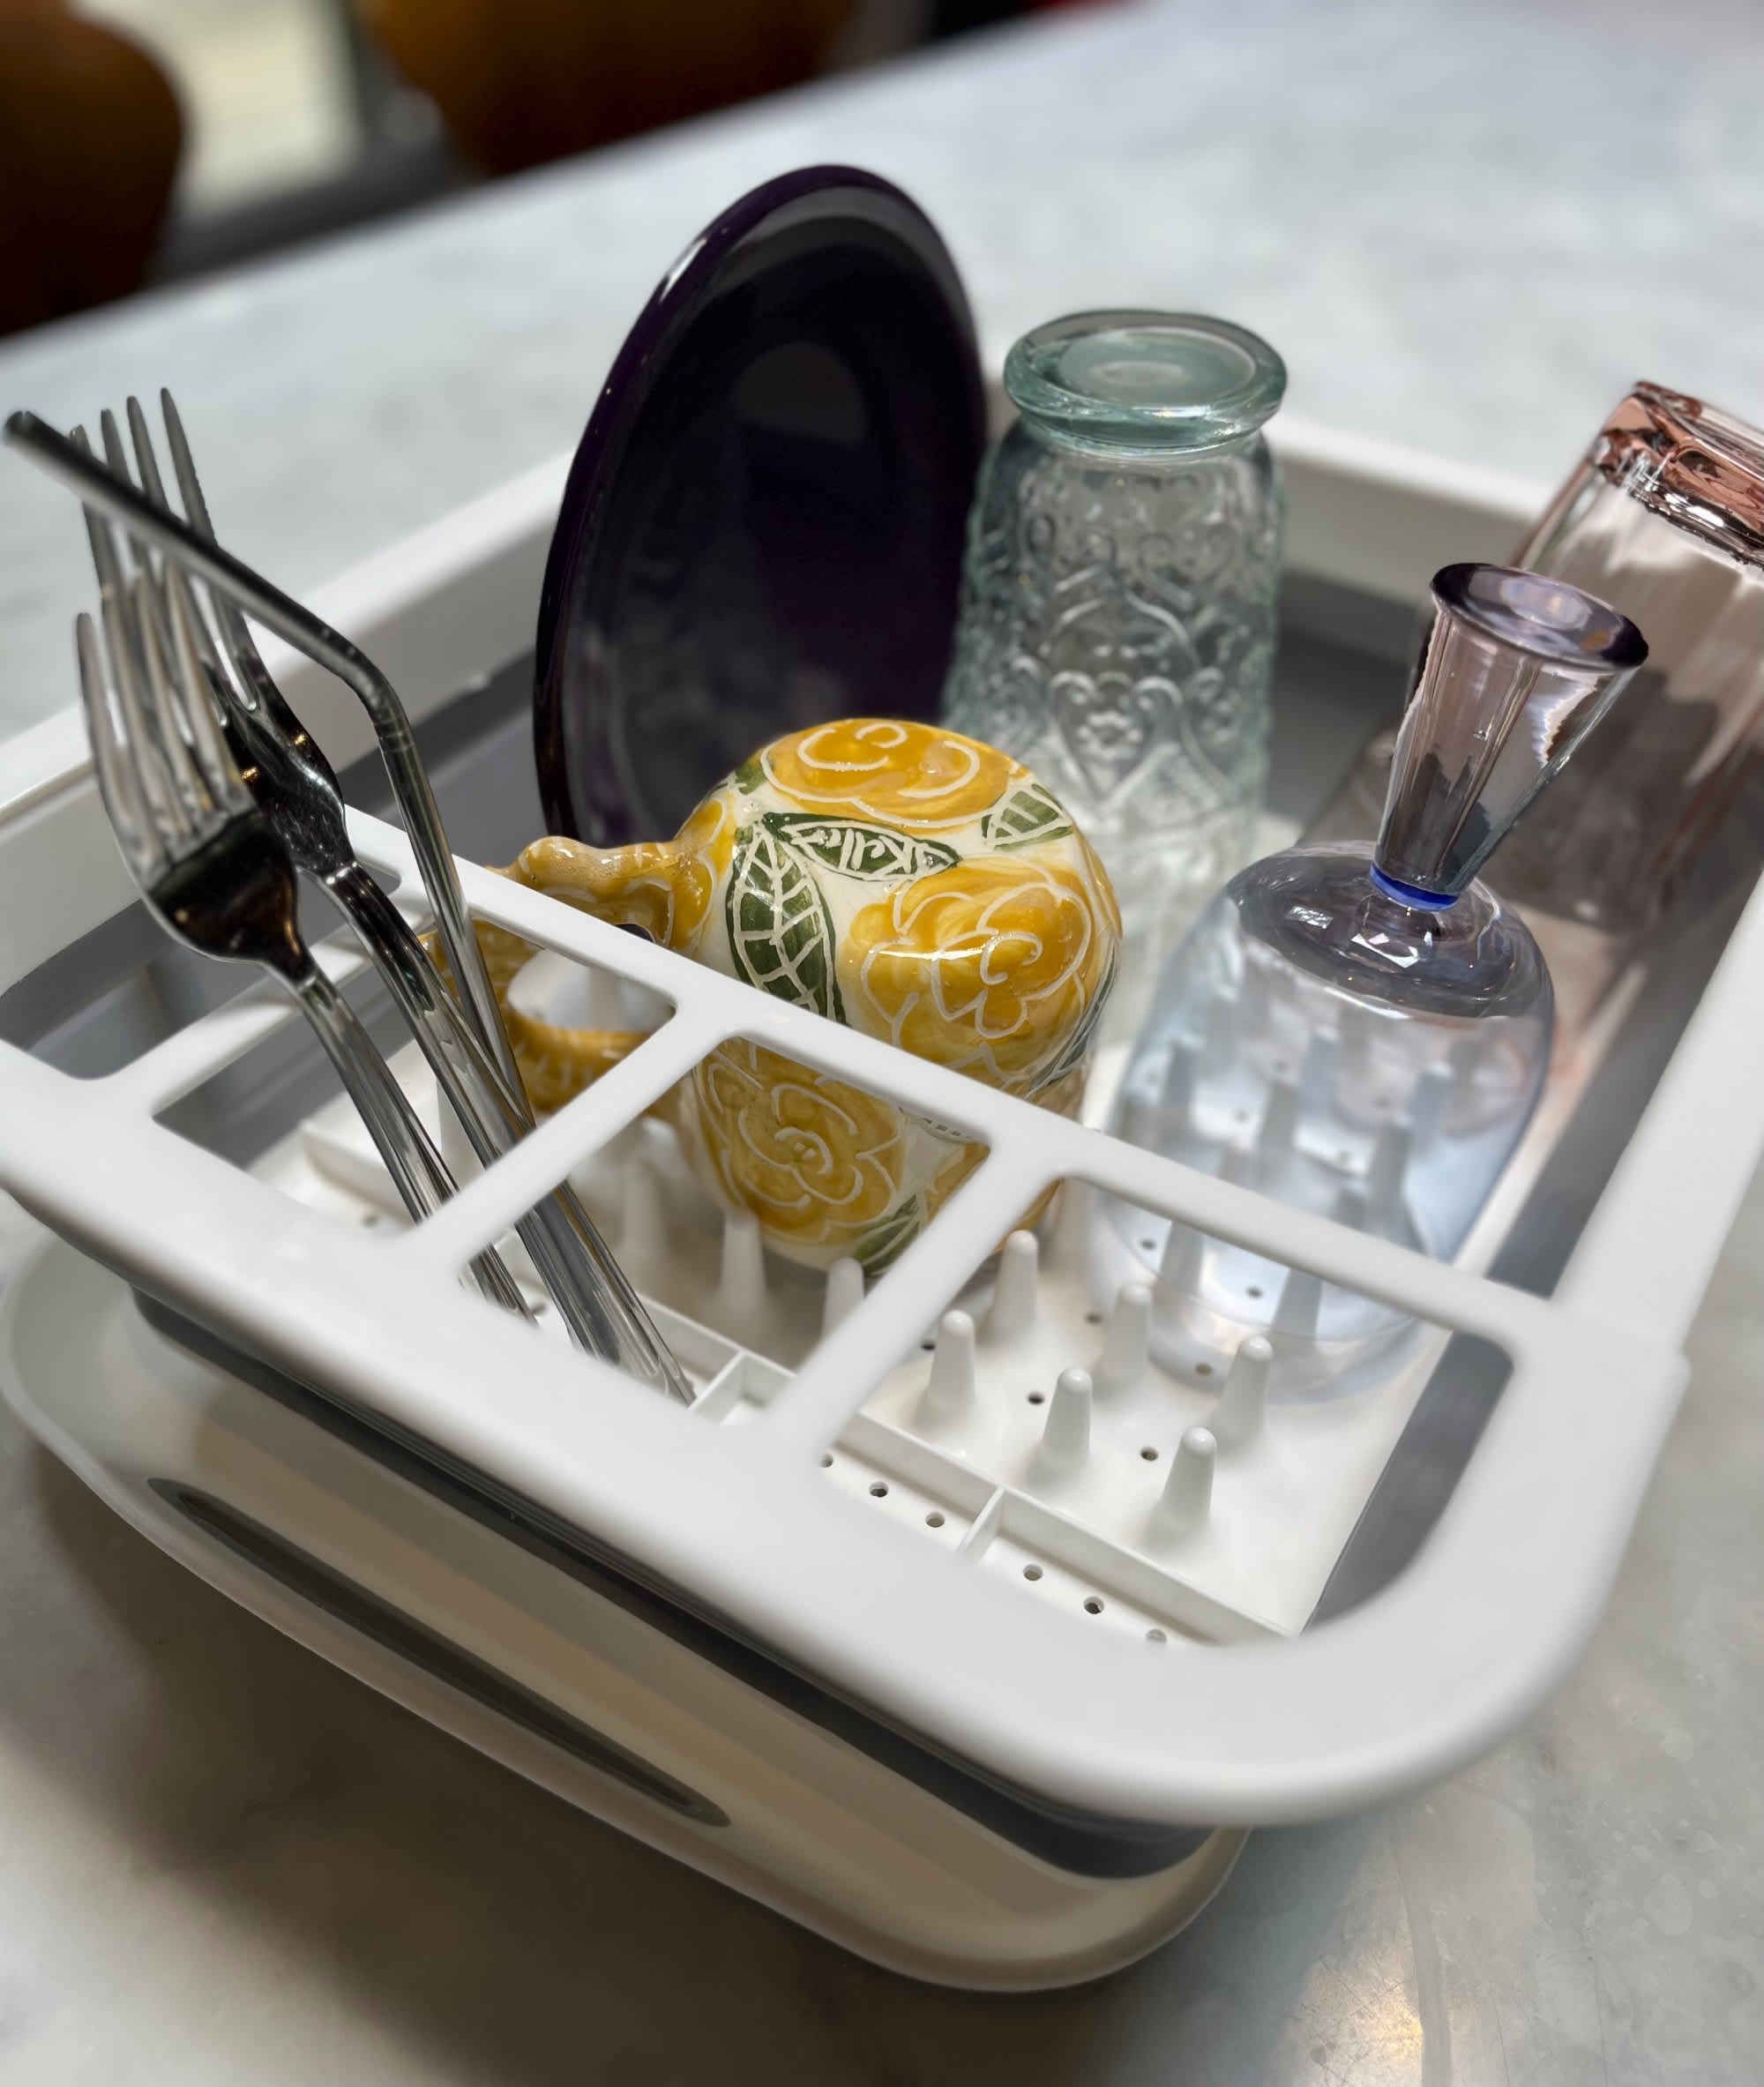 Best Collapsible Dish Rack - Ahyuan Collapsible Dish Rack